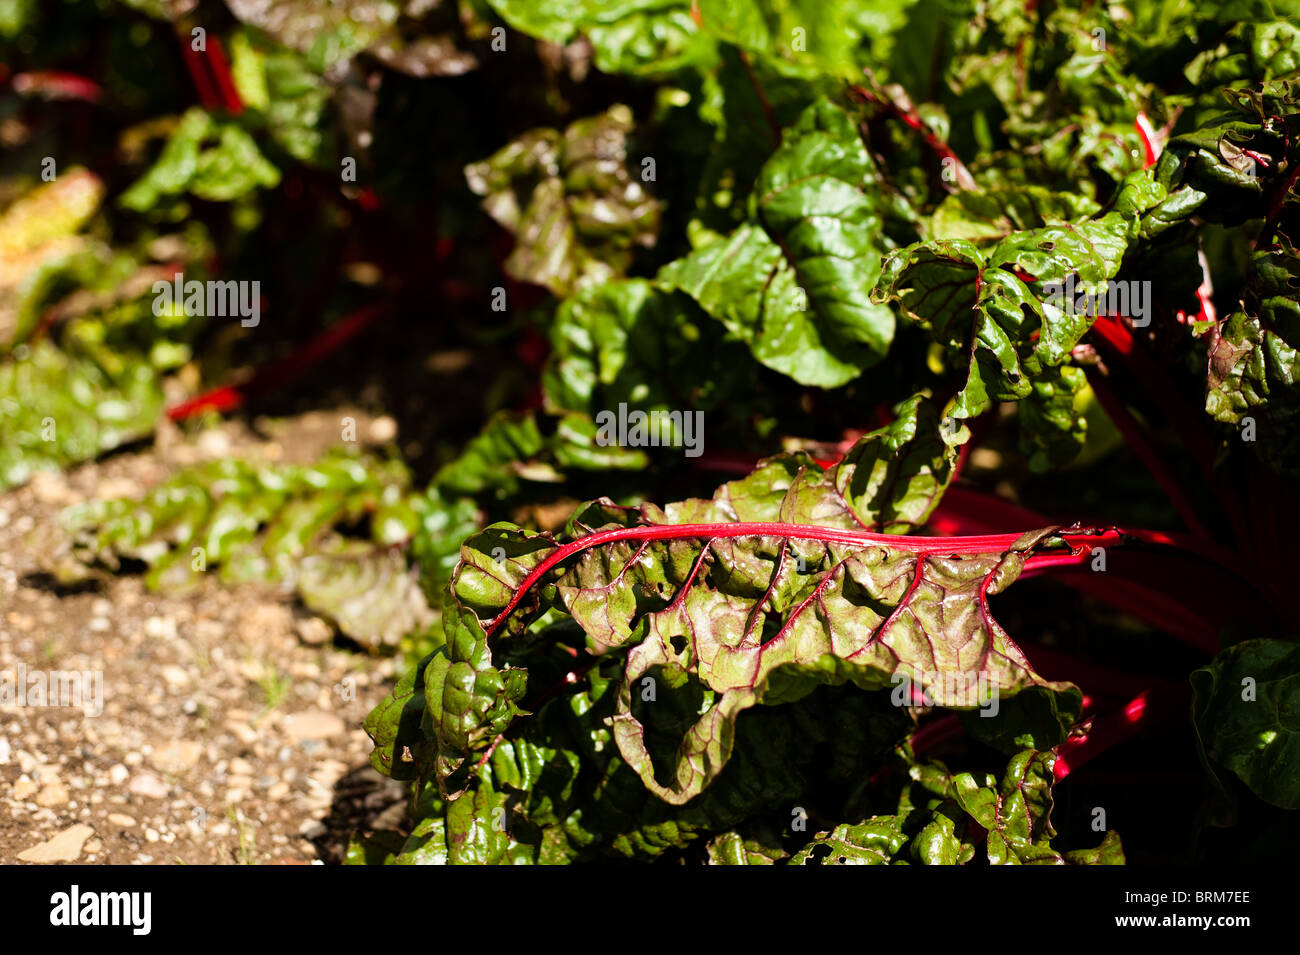 Leaf Beet, Ruby Chard, growing at The Lost Gardens of Heligan in Cornwall, United Kingdom Stock Photo